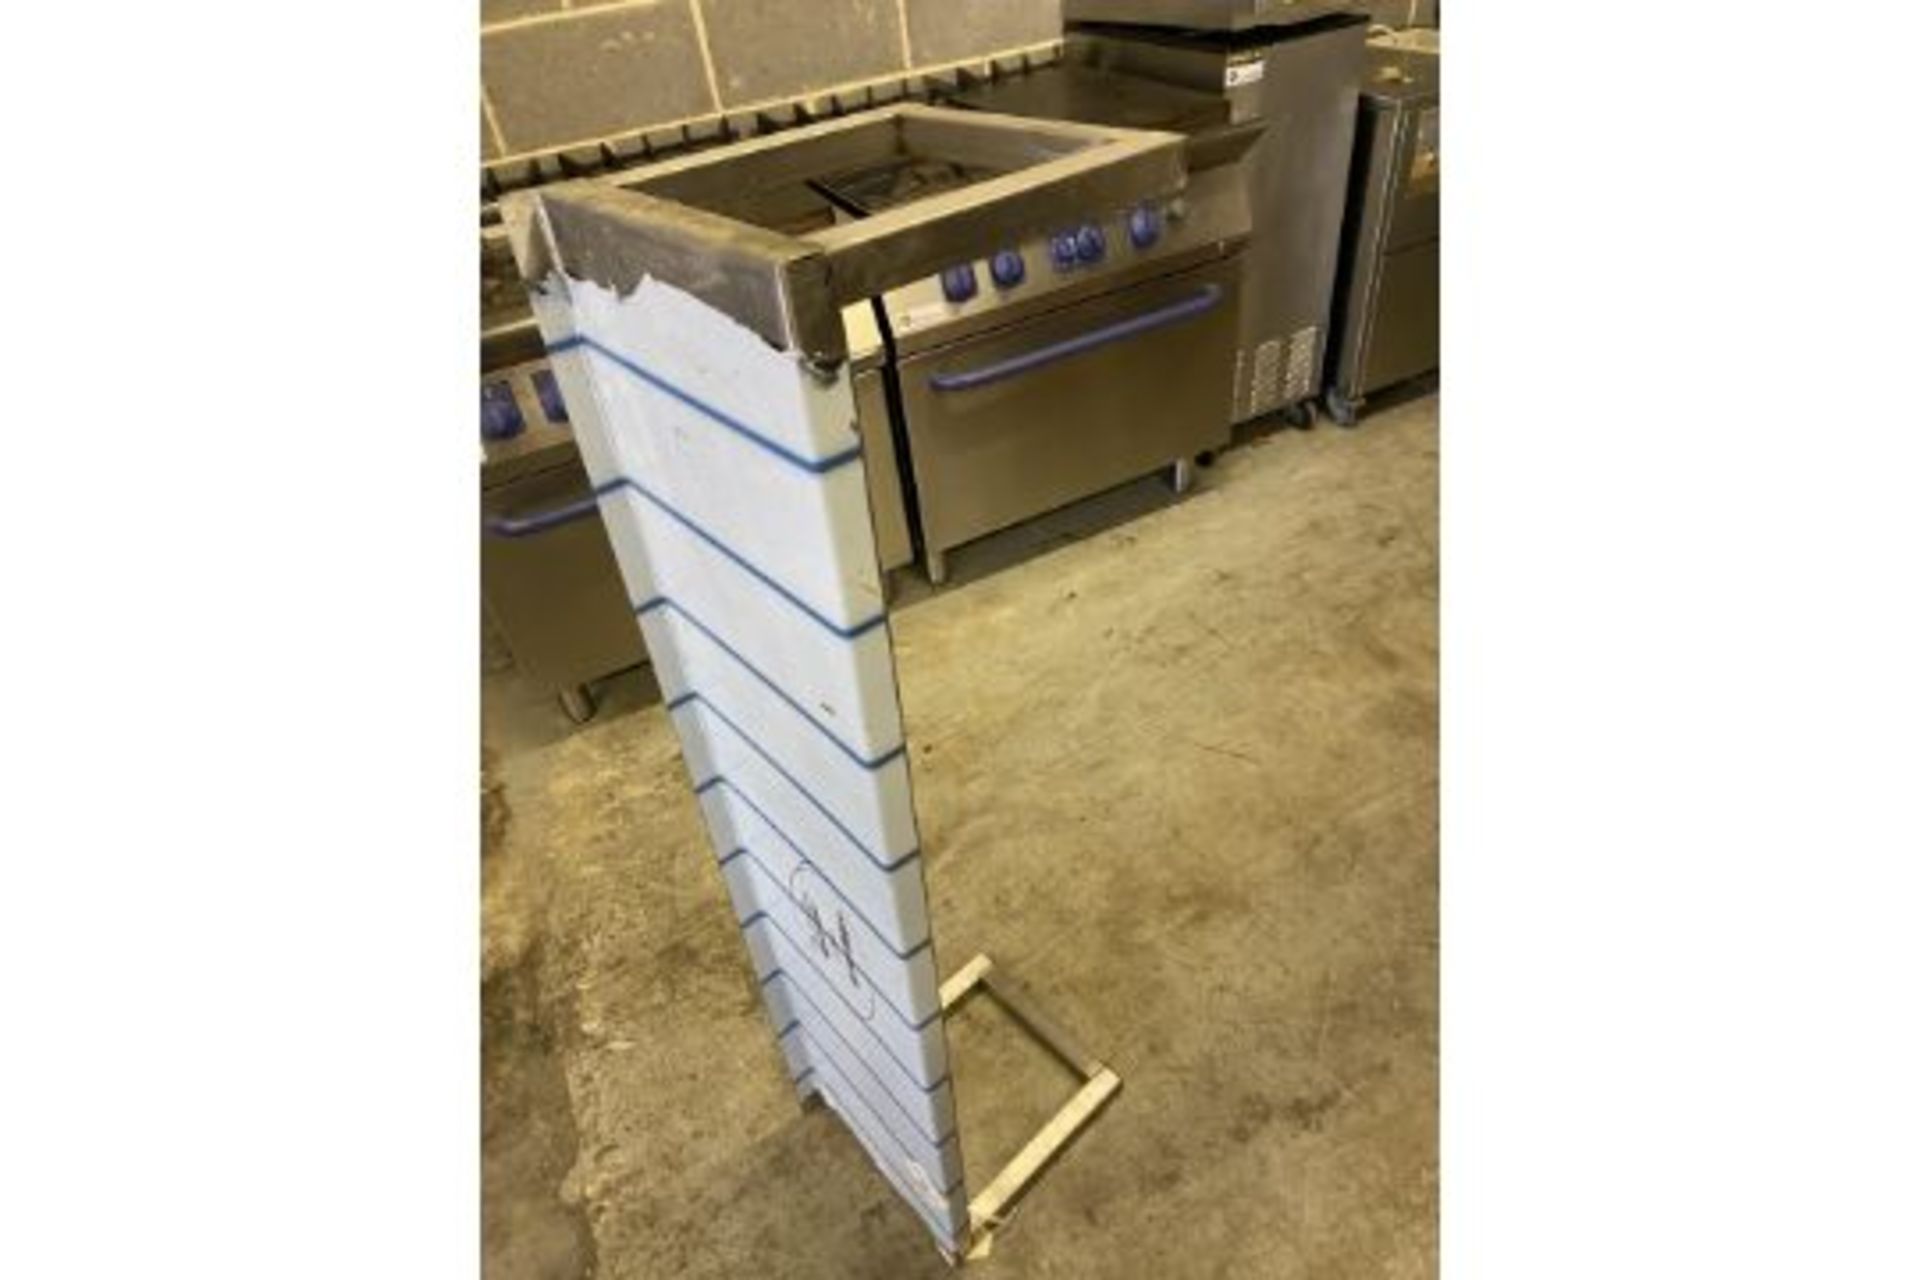 Stainless Steel Overshelf, 1200 mm x 280 mm x 300 mm High - Image 2 of 2